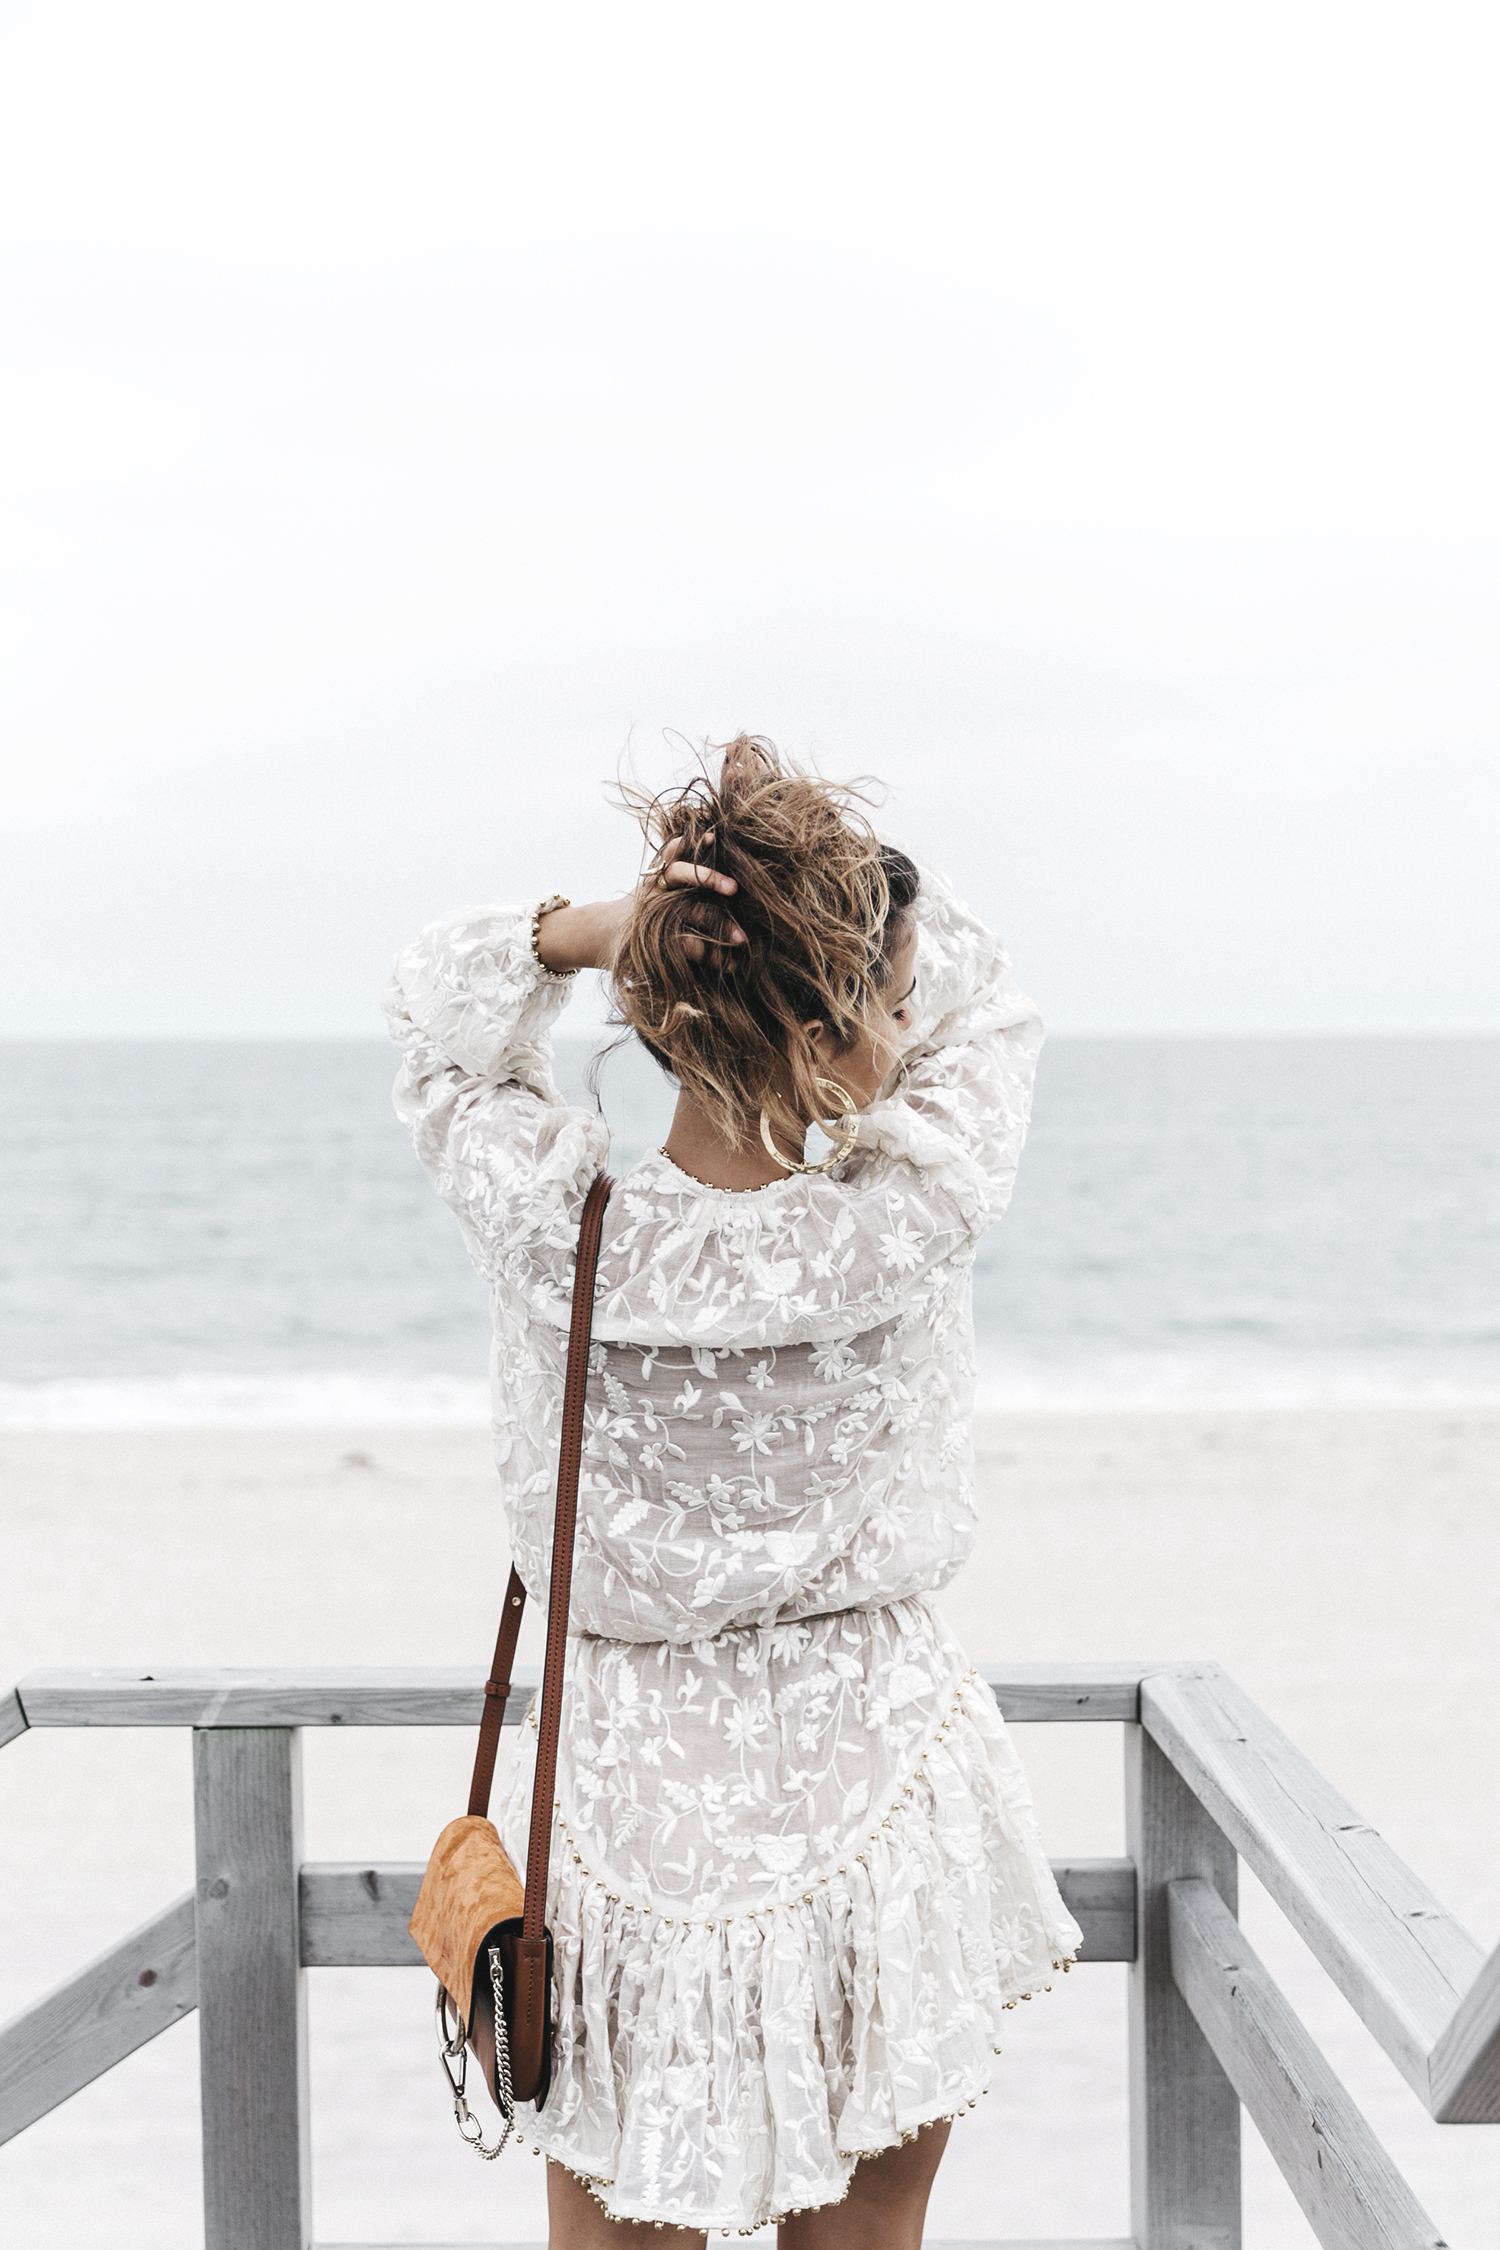 Revolve_in_The_Hamptons-Zimmermann-Embroidered_Dress-WHite_Dress-Chloe_Fay_Bag-Chloe_Wedges-Outfit-174